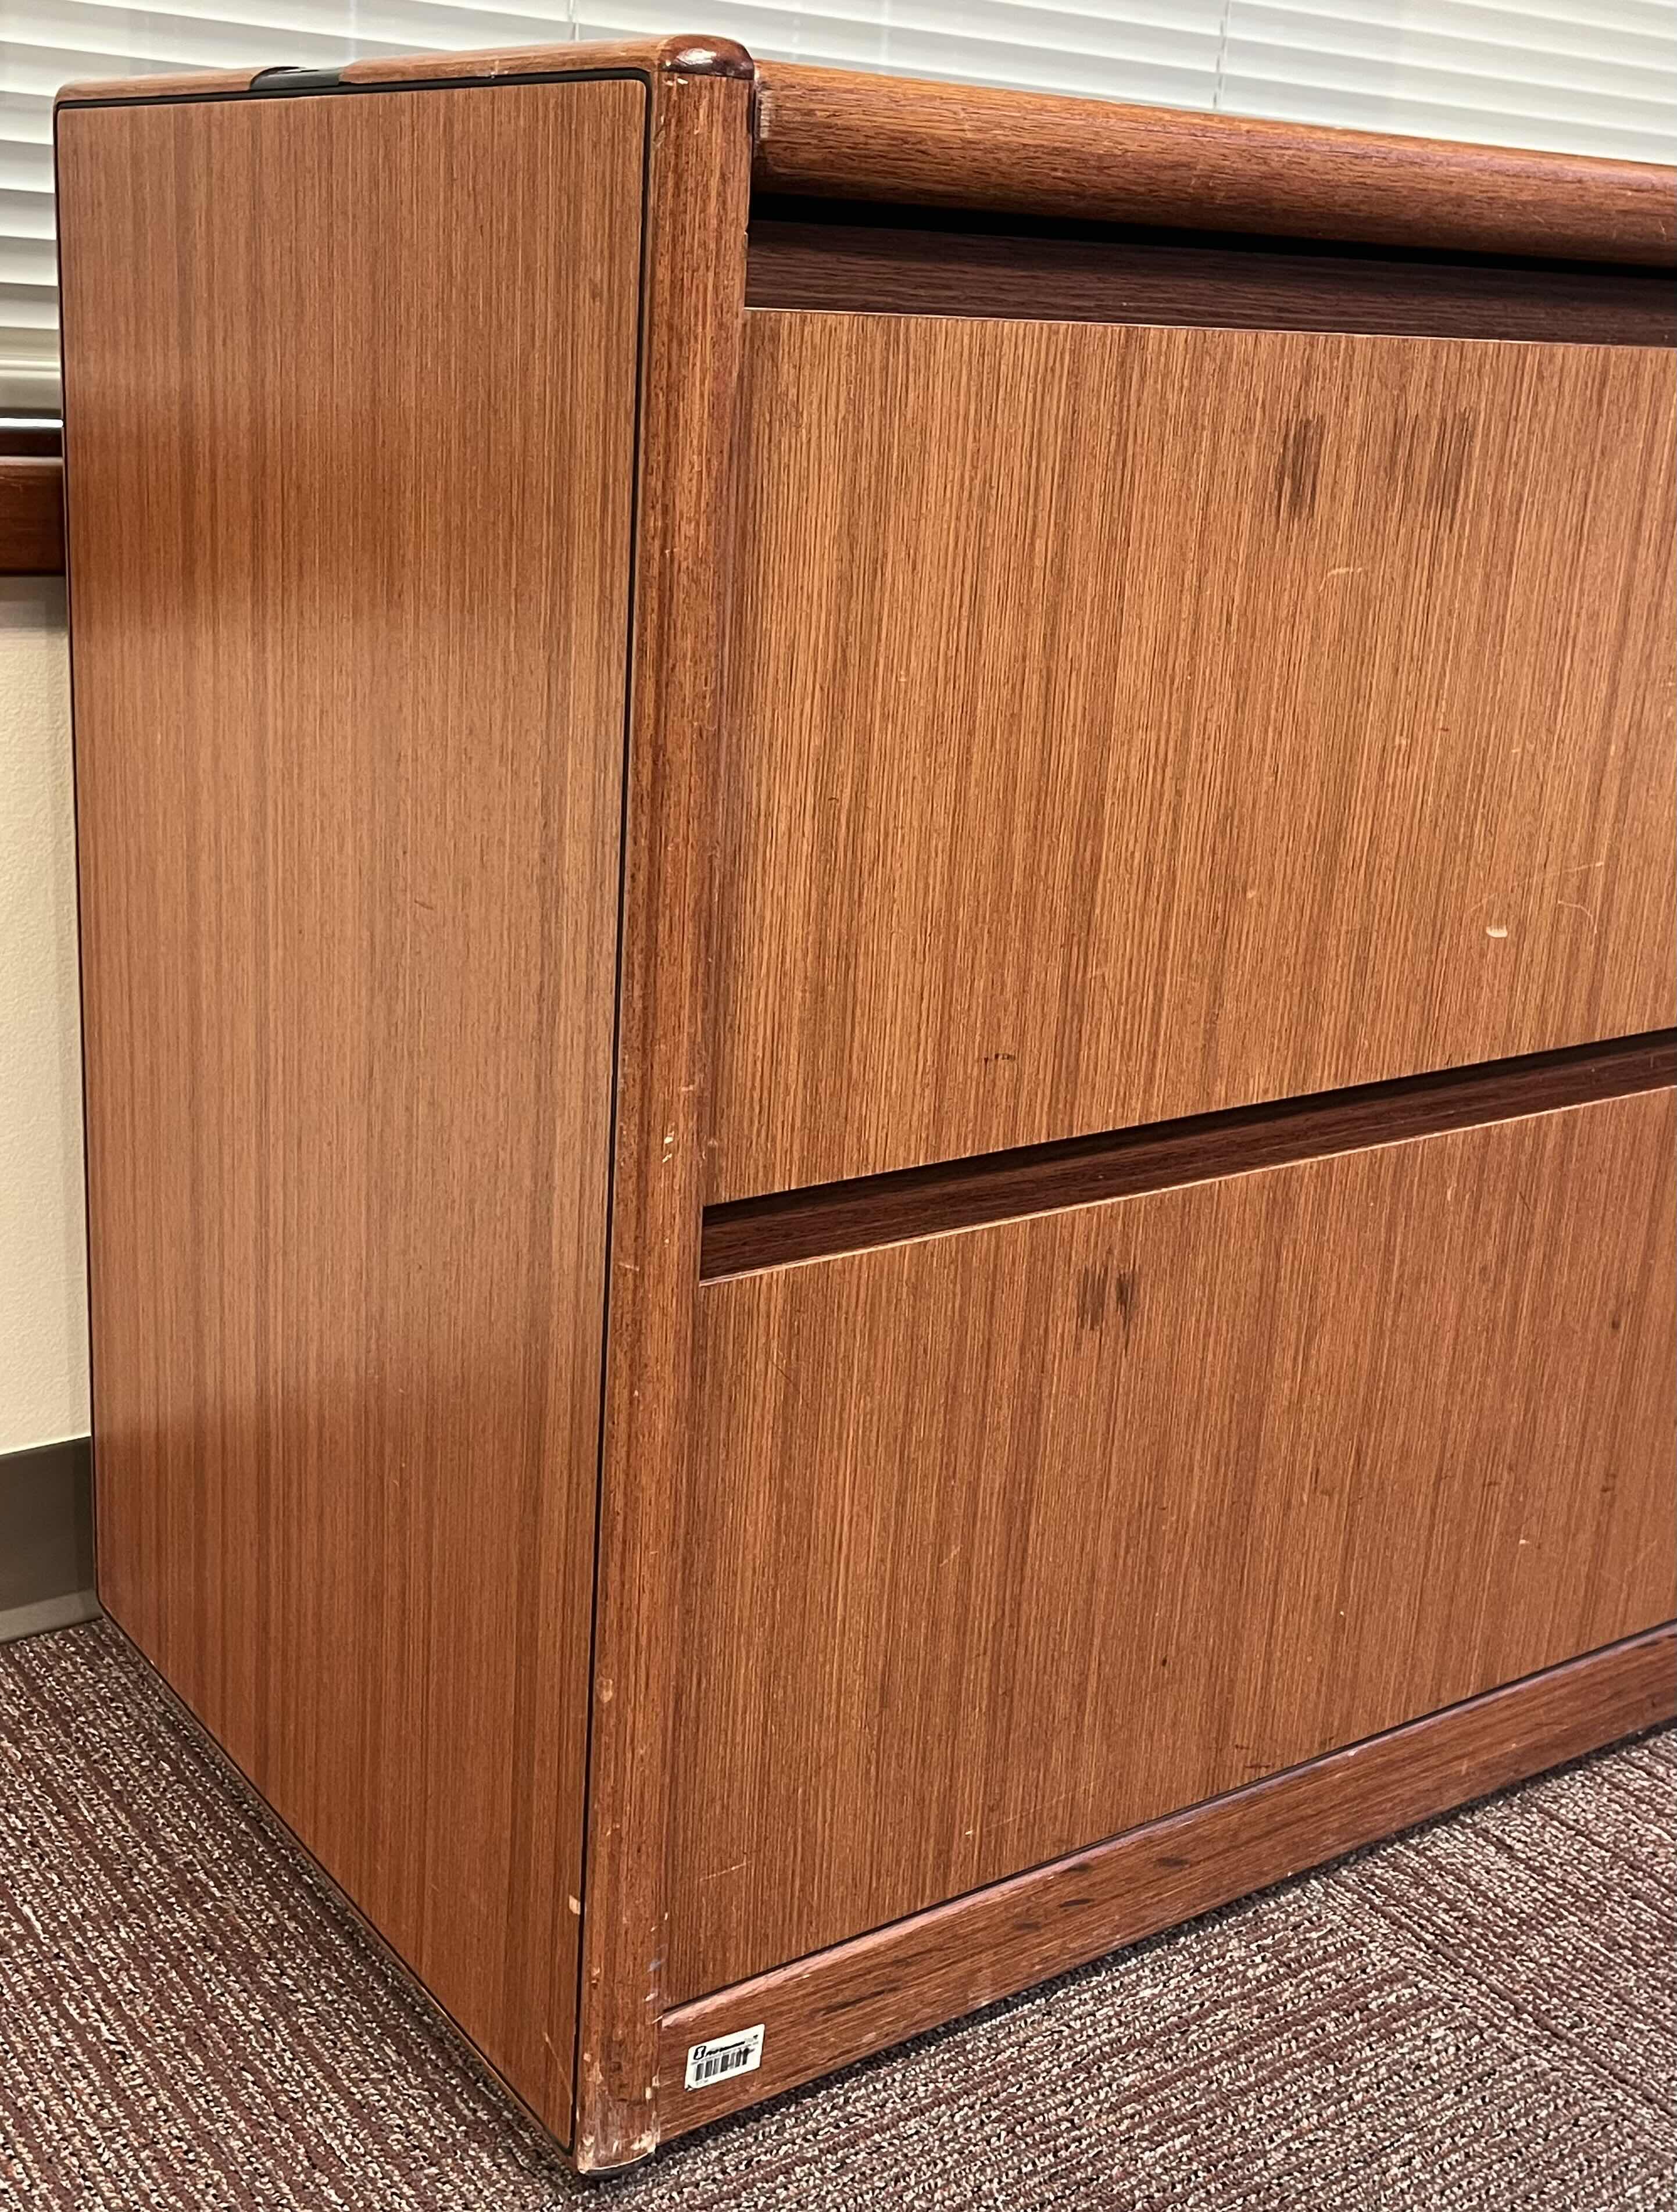 Photo 4 of STEELCASE MAHOGANY SOLID WOOD 2 DRAWER LATERAL FILE CABINET 45” X 20” H29.5”